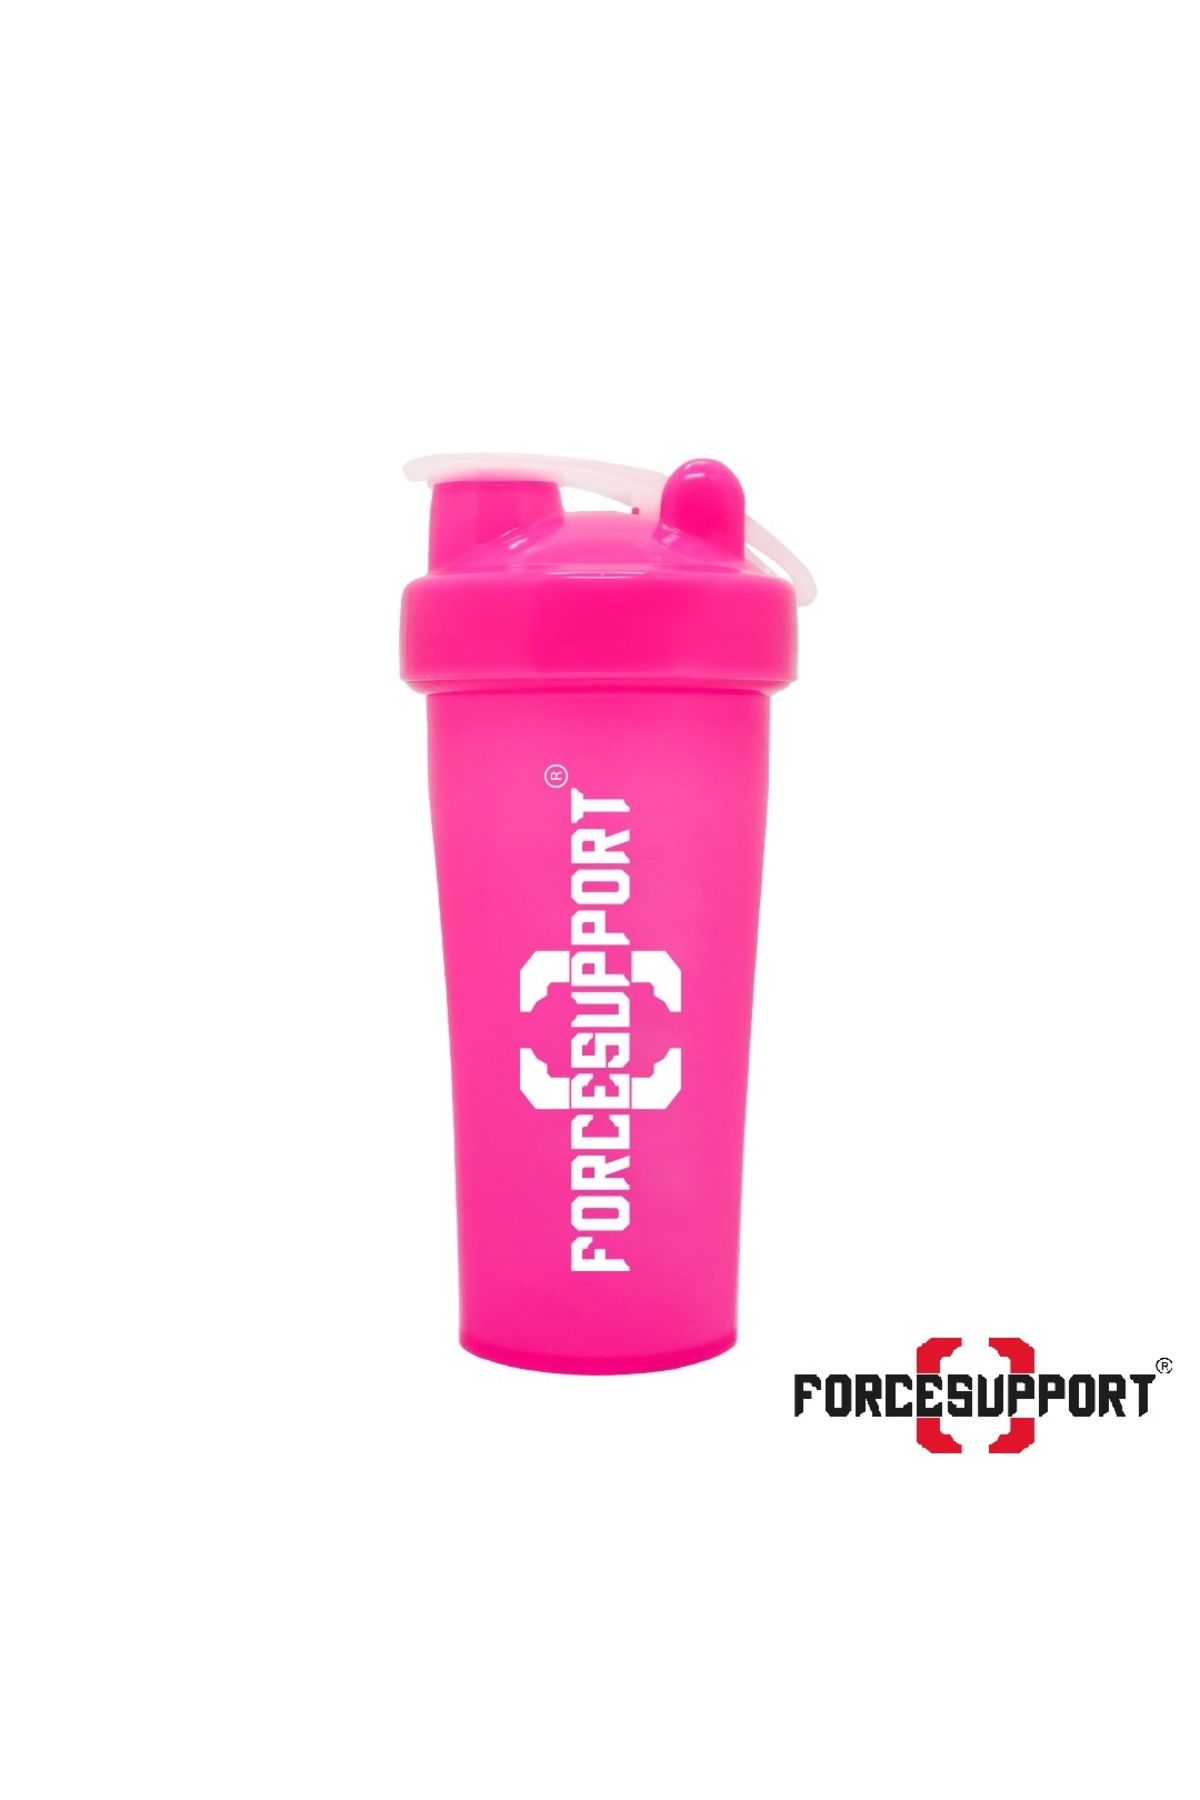 Force Supports SHAKER 700ML